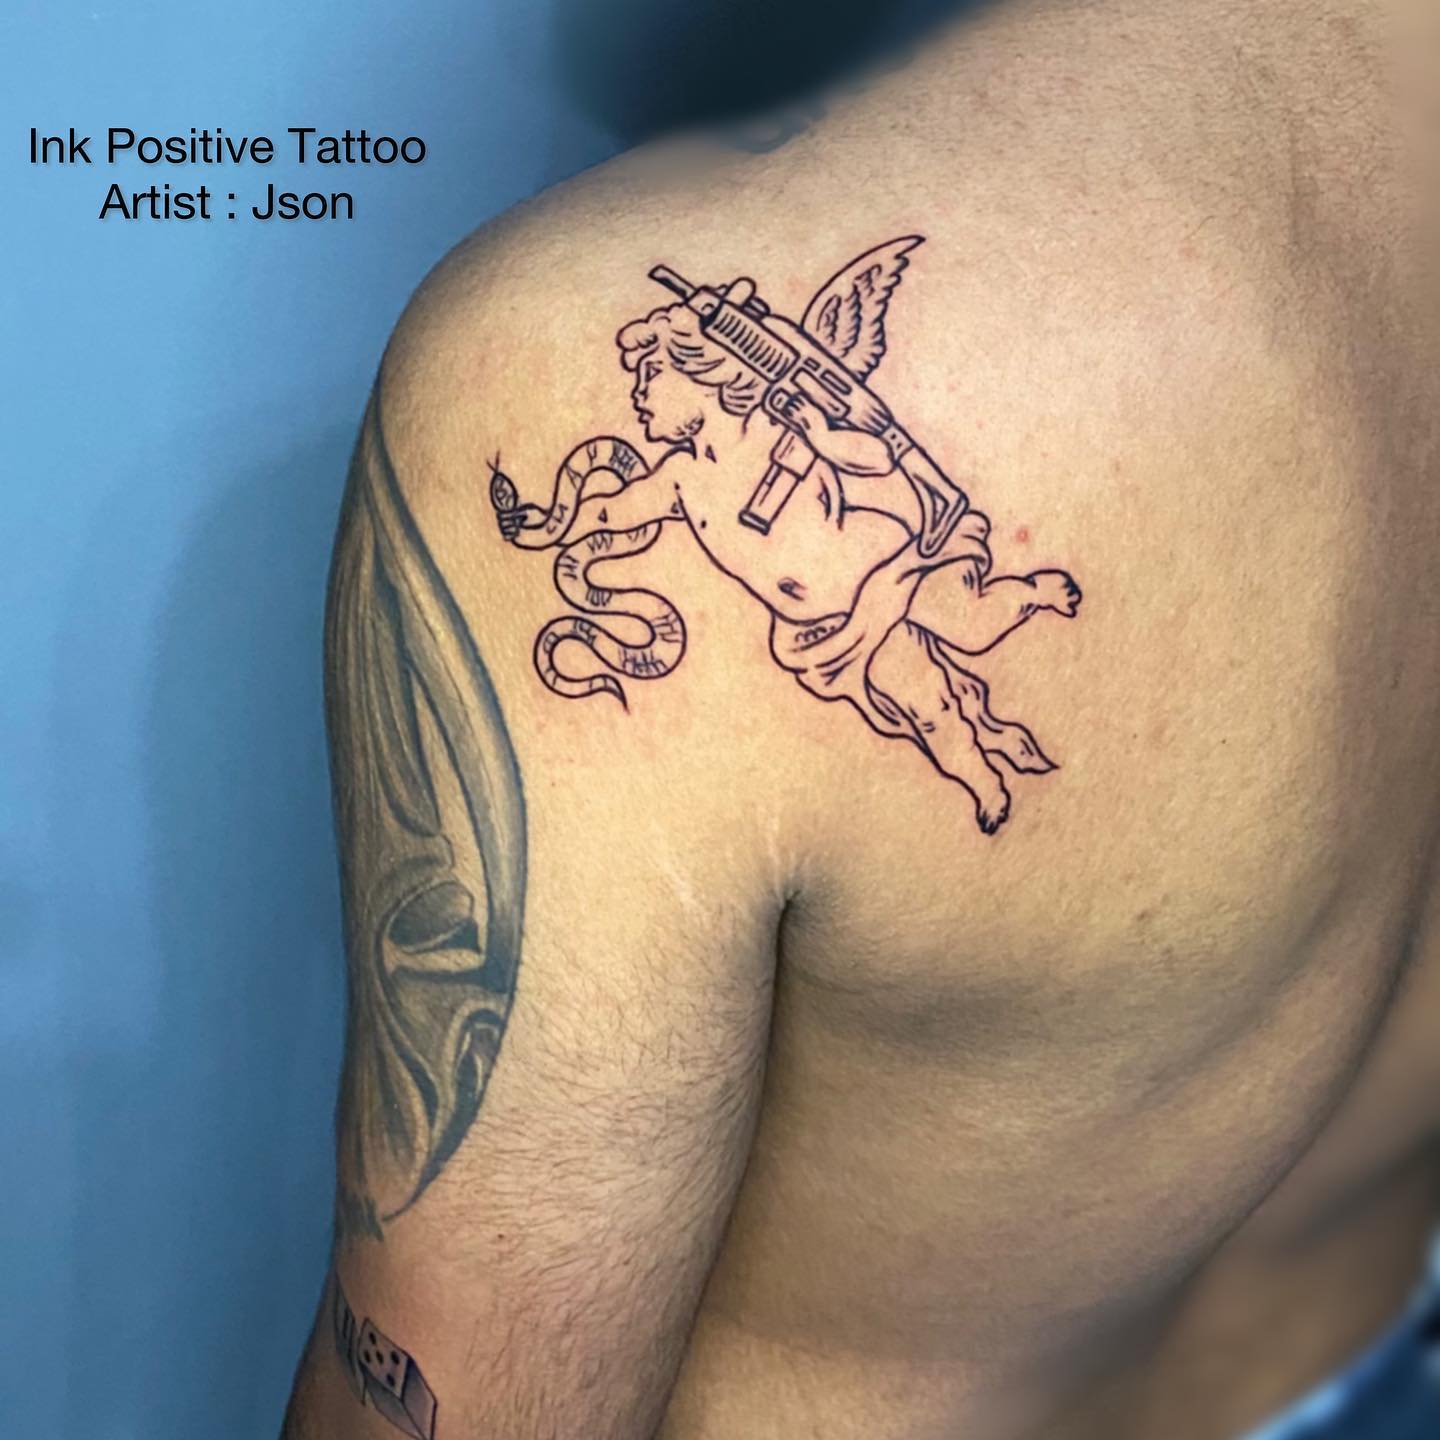 Skin Machine Tattoo Studio - Beautifully designed this STAY POSITIVE !  Tattoo by Akash Chandani Thanks for looking! Email for appointments-  skinmachineteam@gmail.com #fearless #art #girlswithtattoos #inkedgirls  #inkedforlife #inked #tattooed #tattoos ...